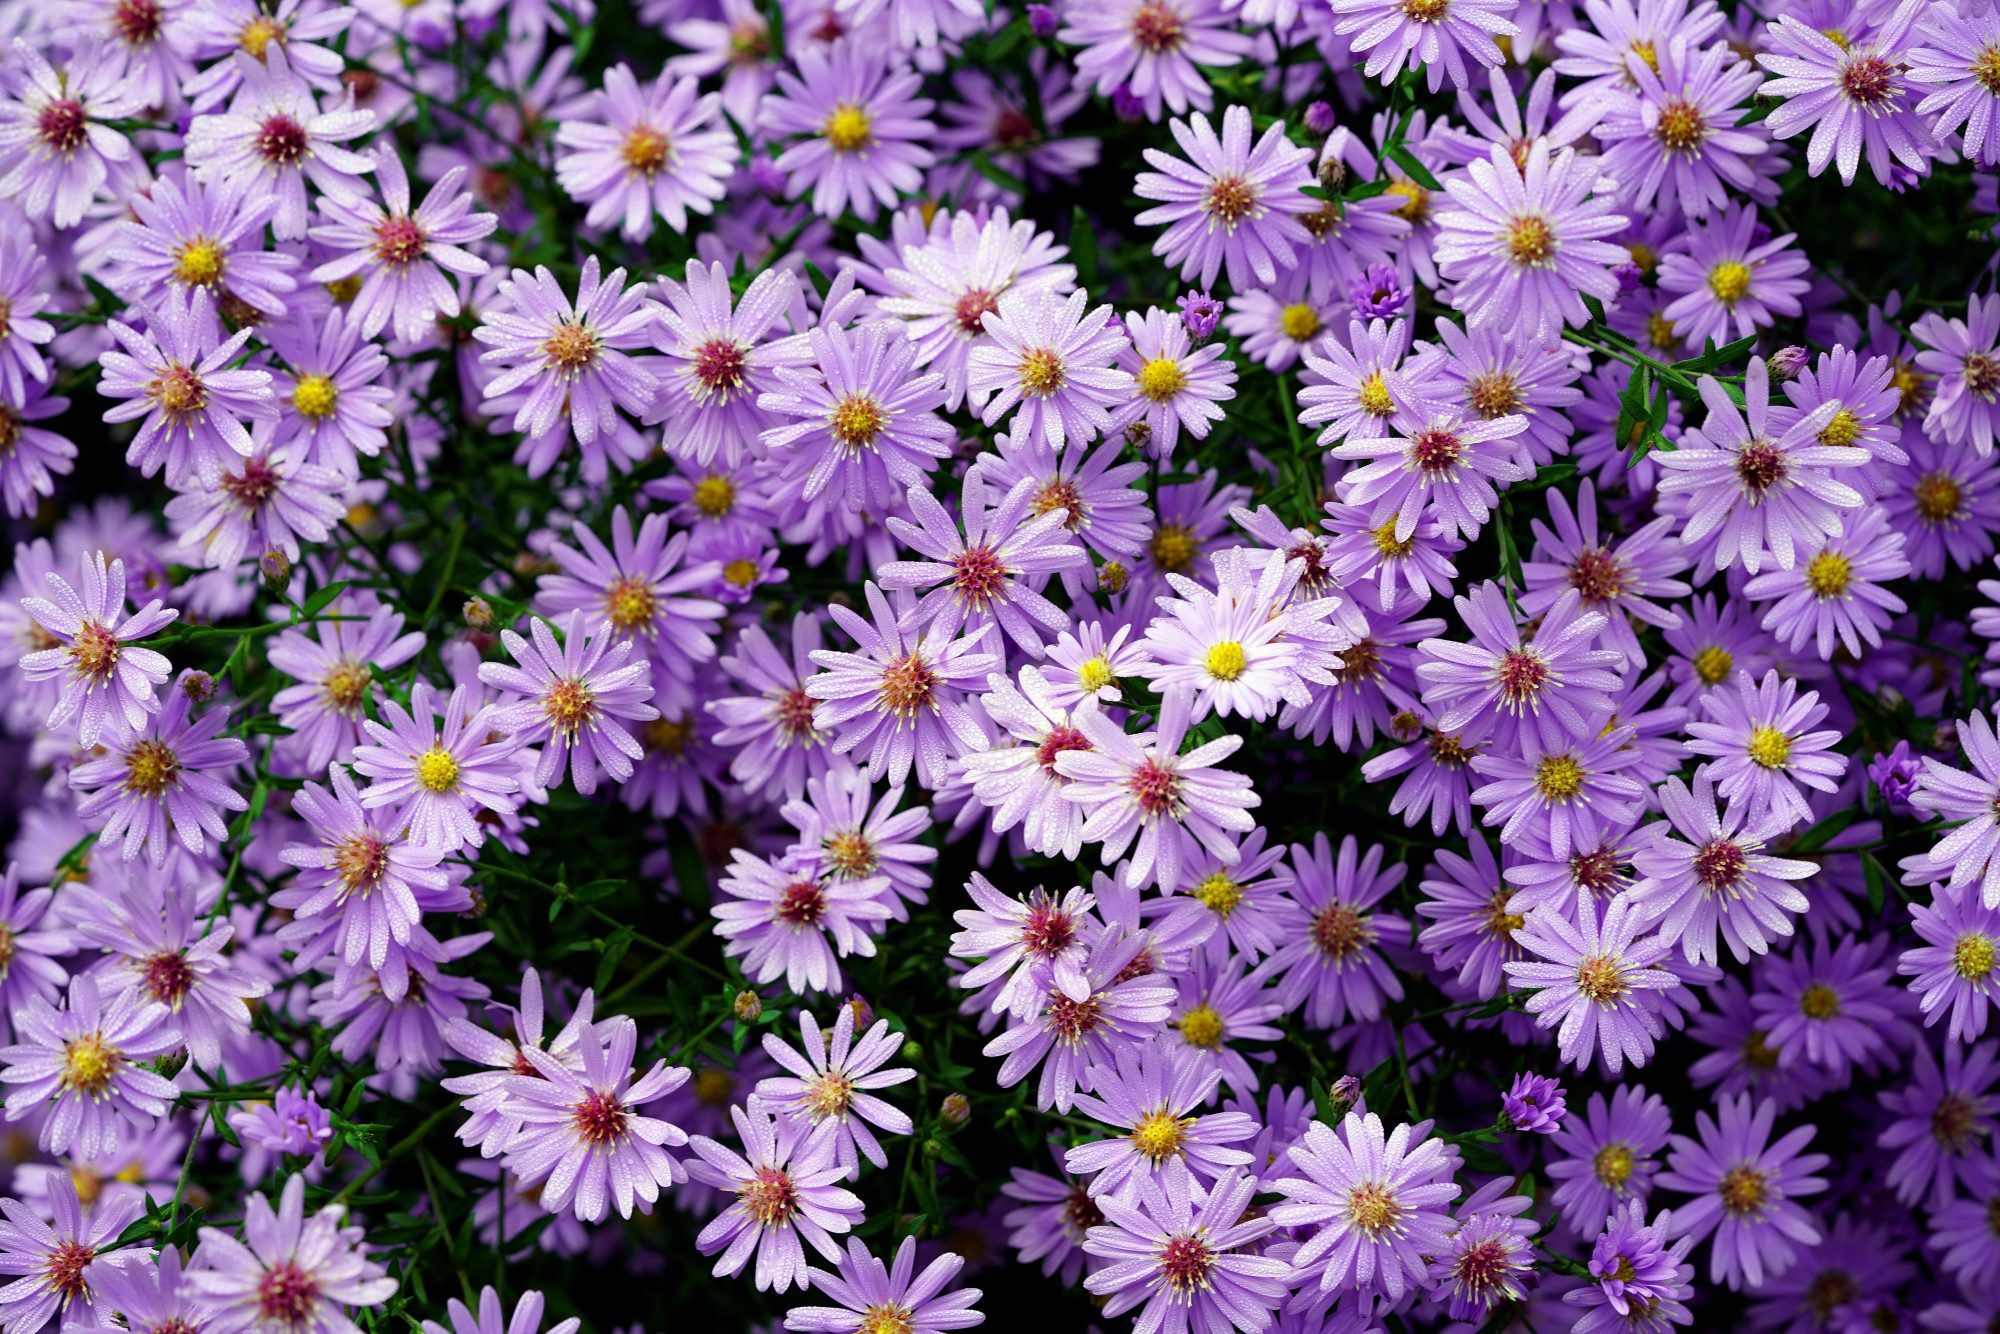  Asters Are the Fall Flower That Will Replace Your Mum Habit